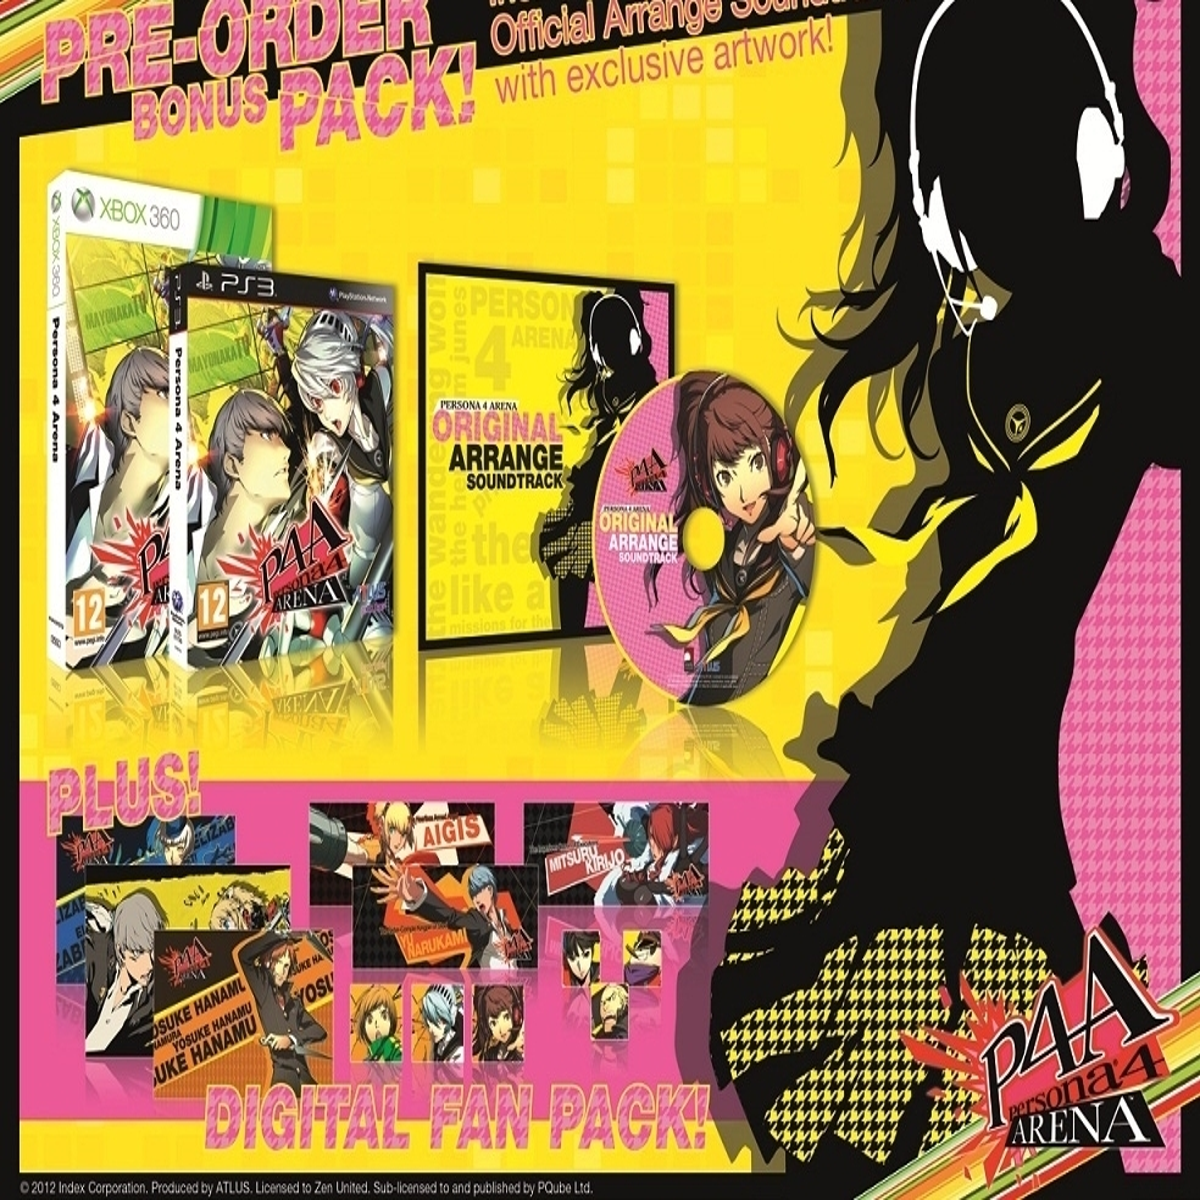 Persona 4 Arena PS3 Game For Sale